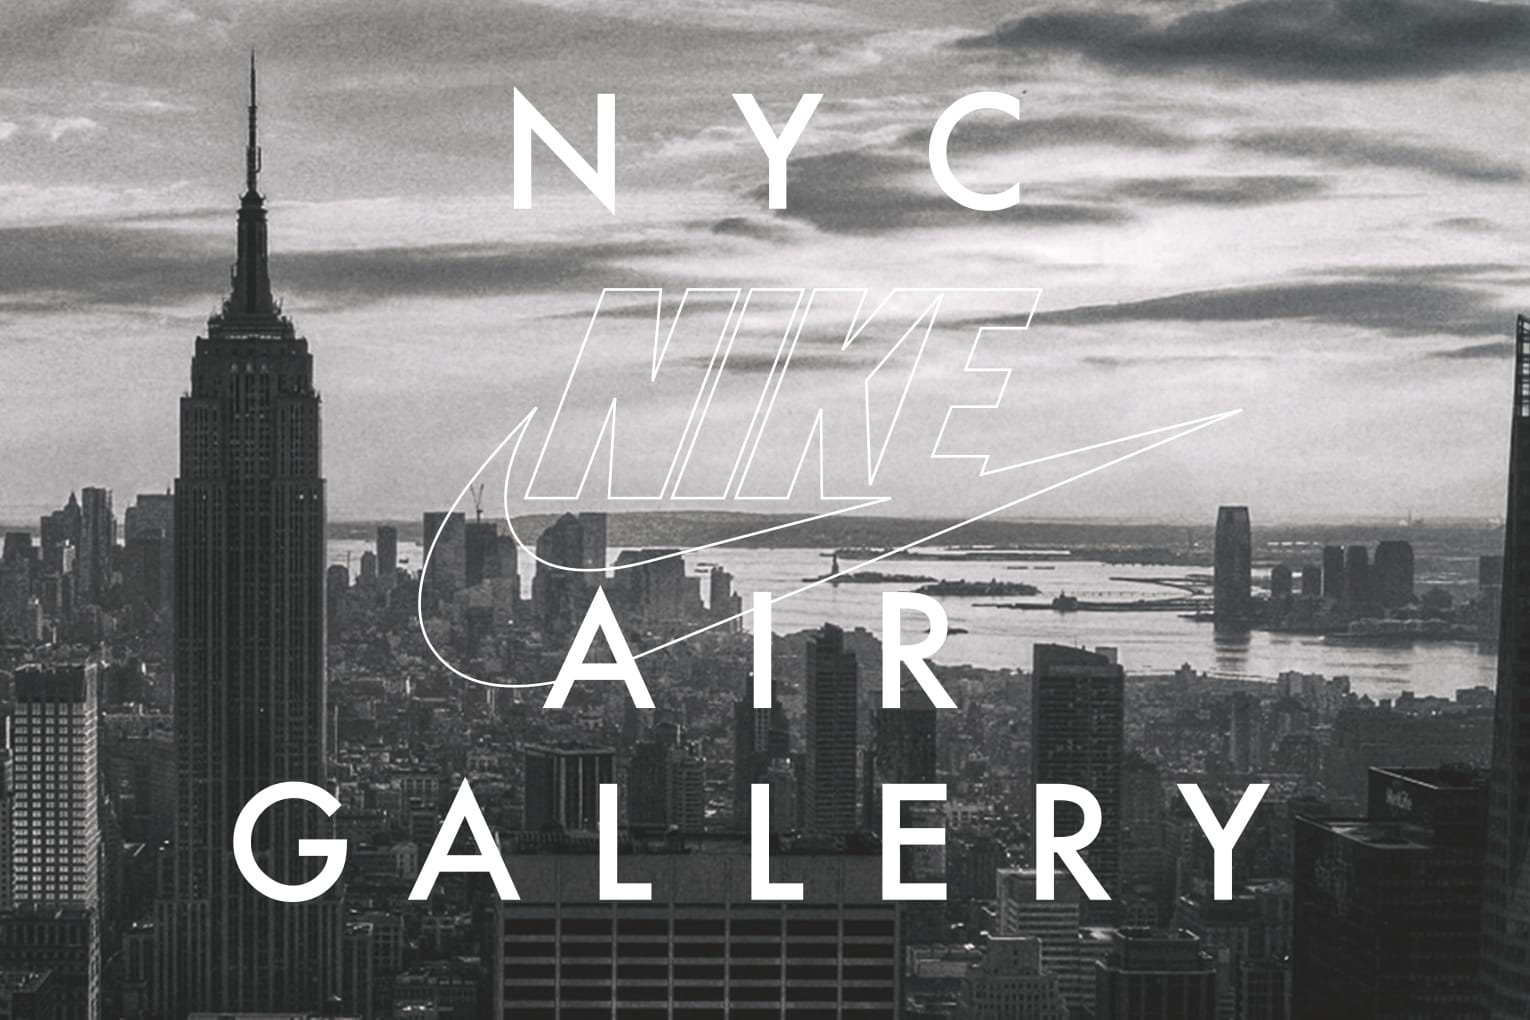 air max day events nyc